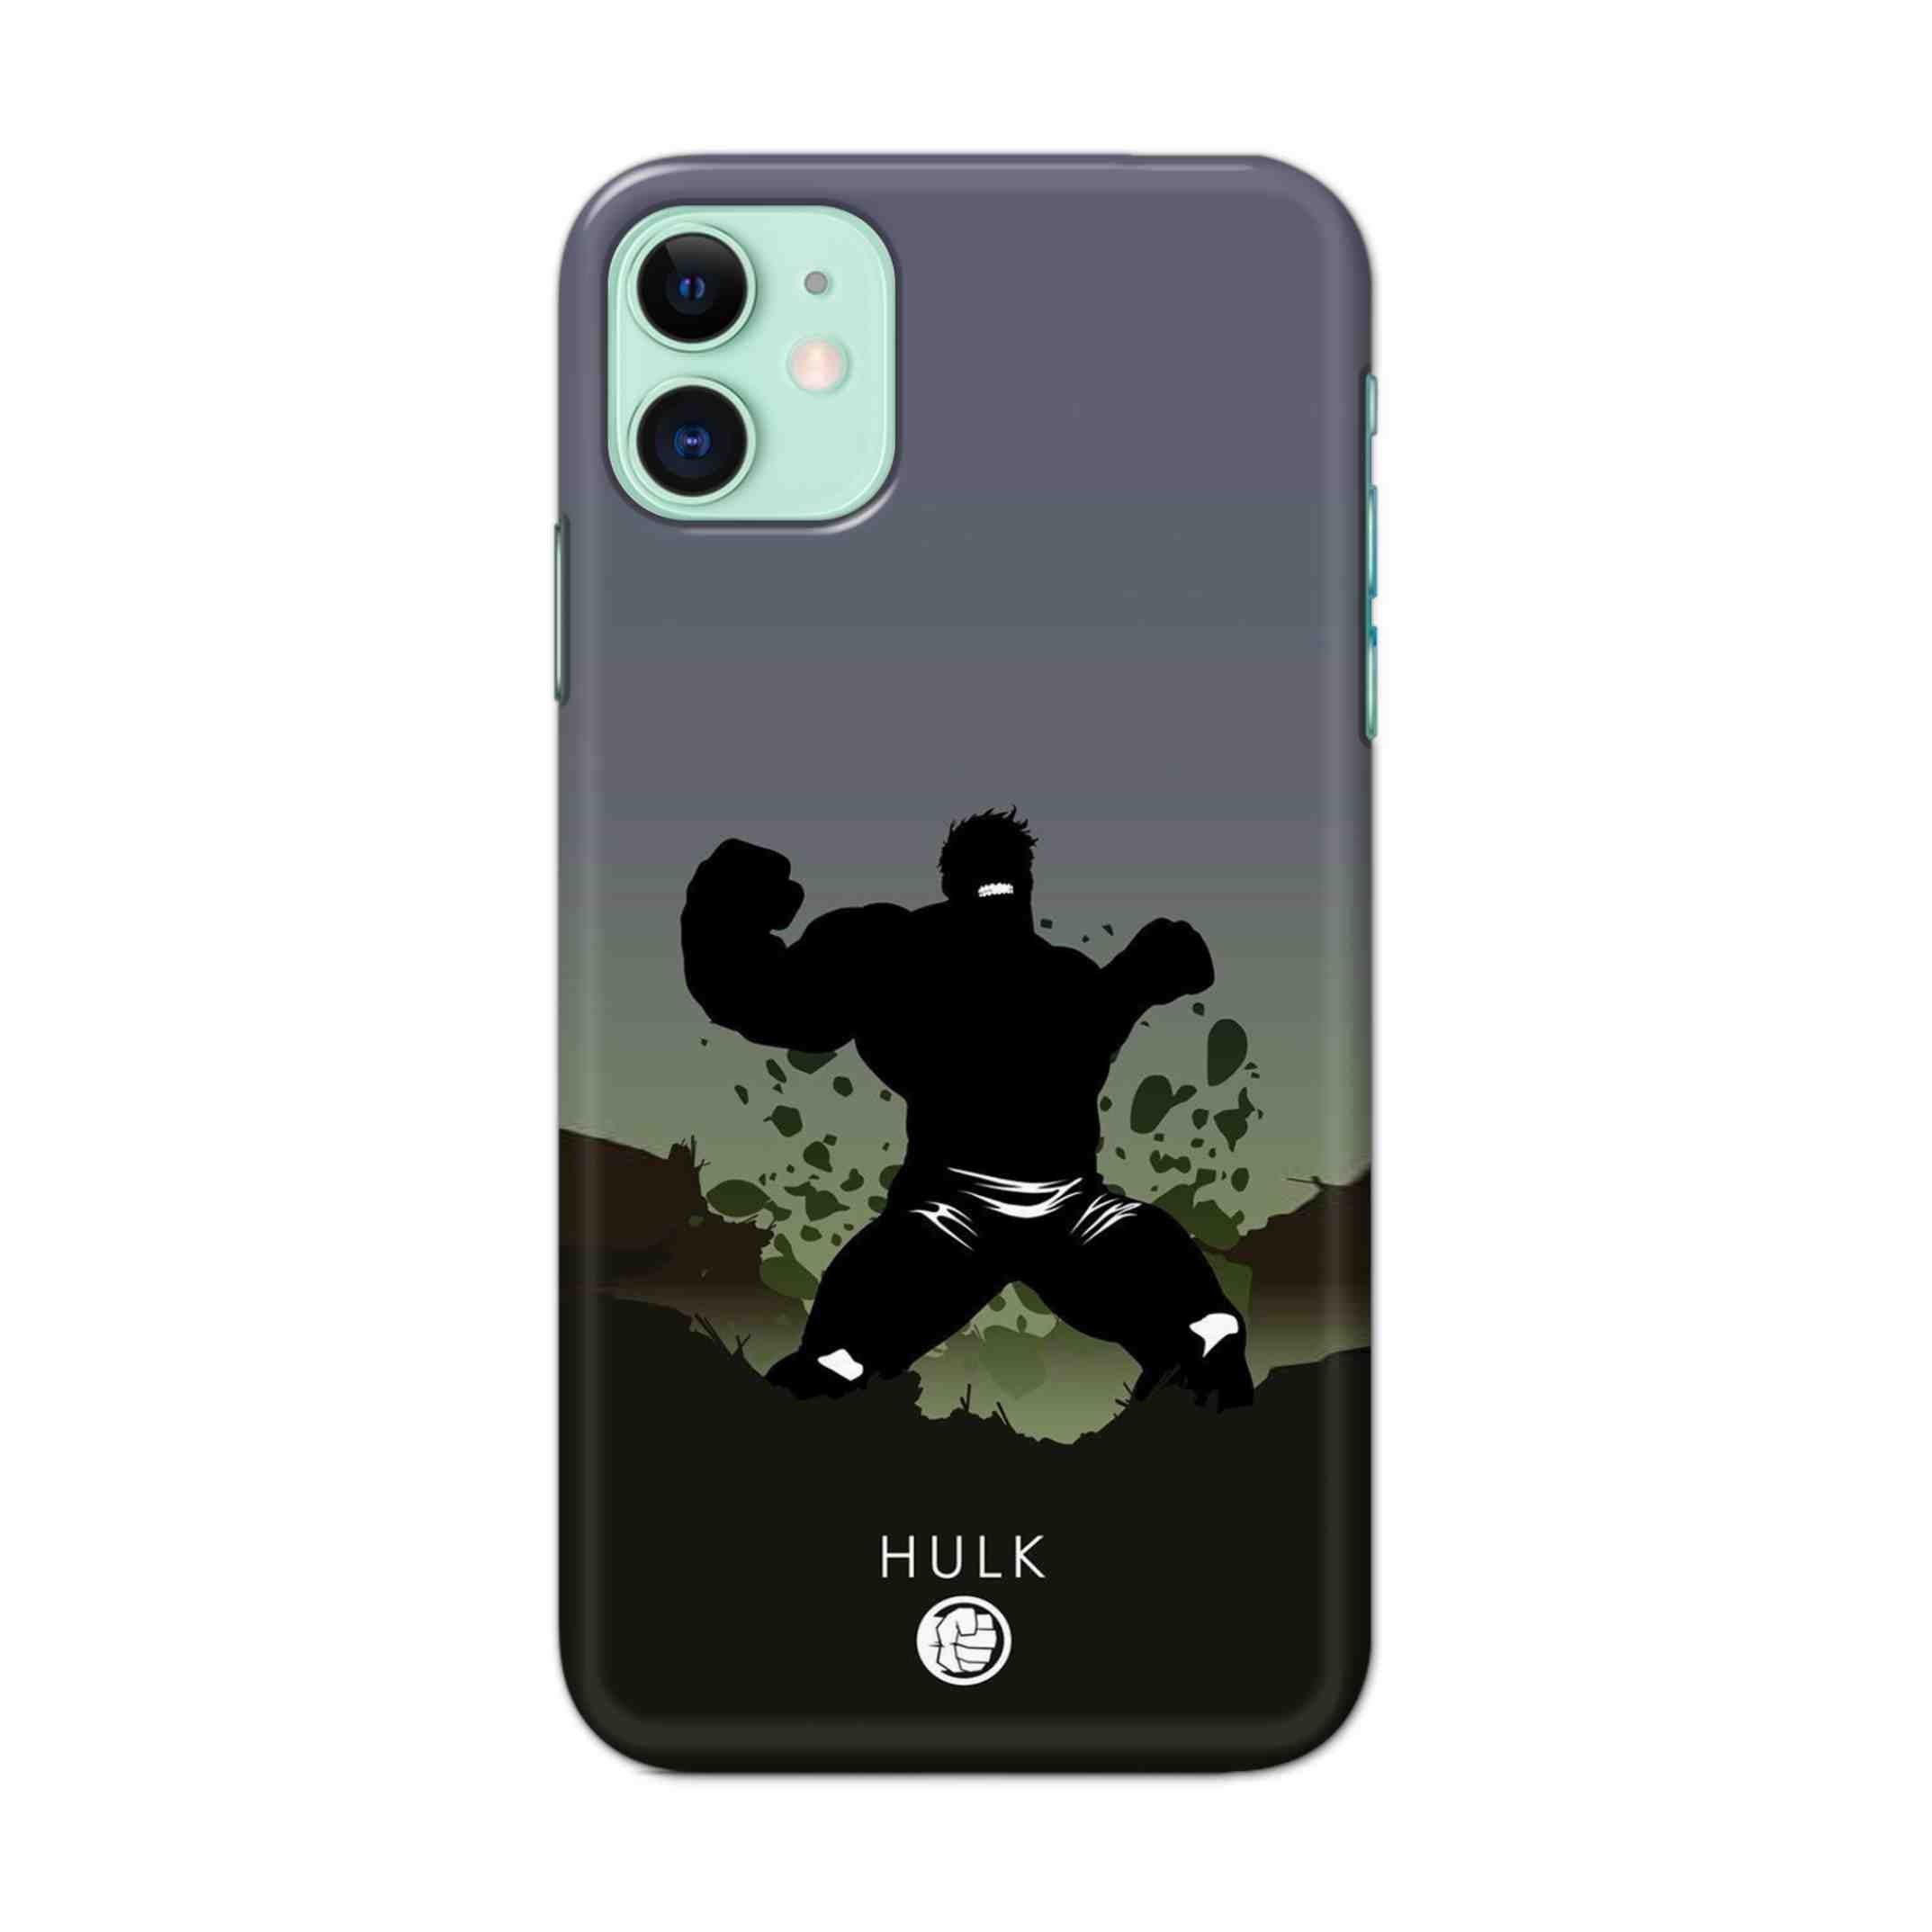 Buy Hulk Drax Hard Back Mobile Phone Case/Cover For iPhone 11 Online